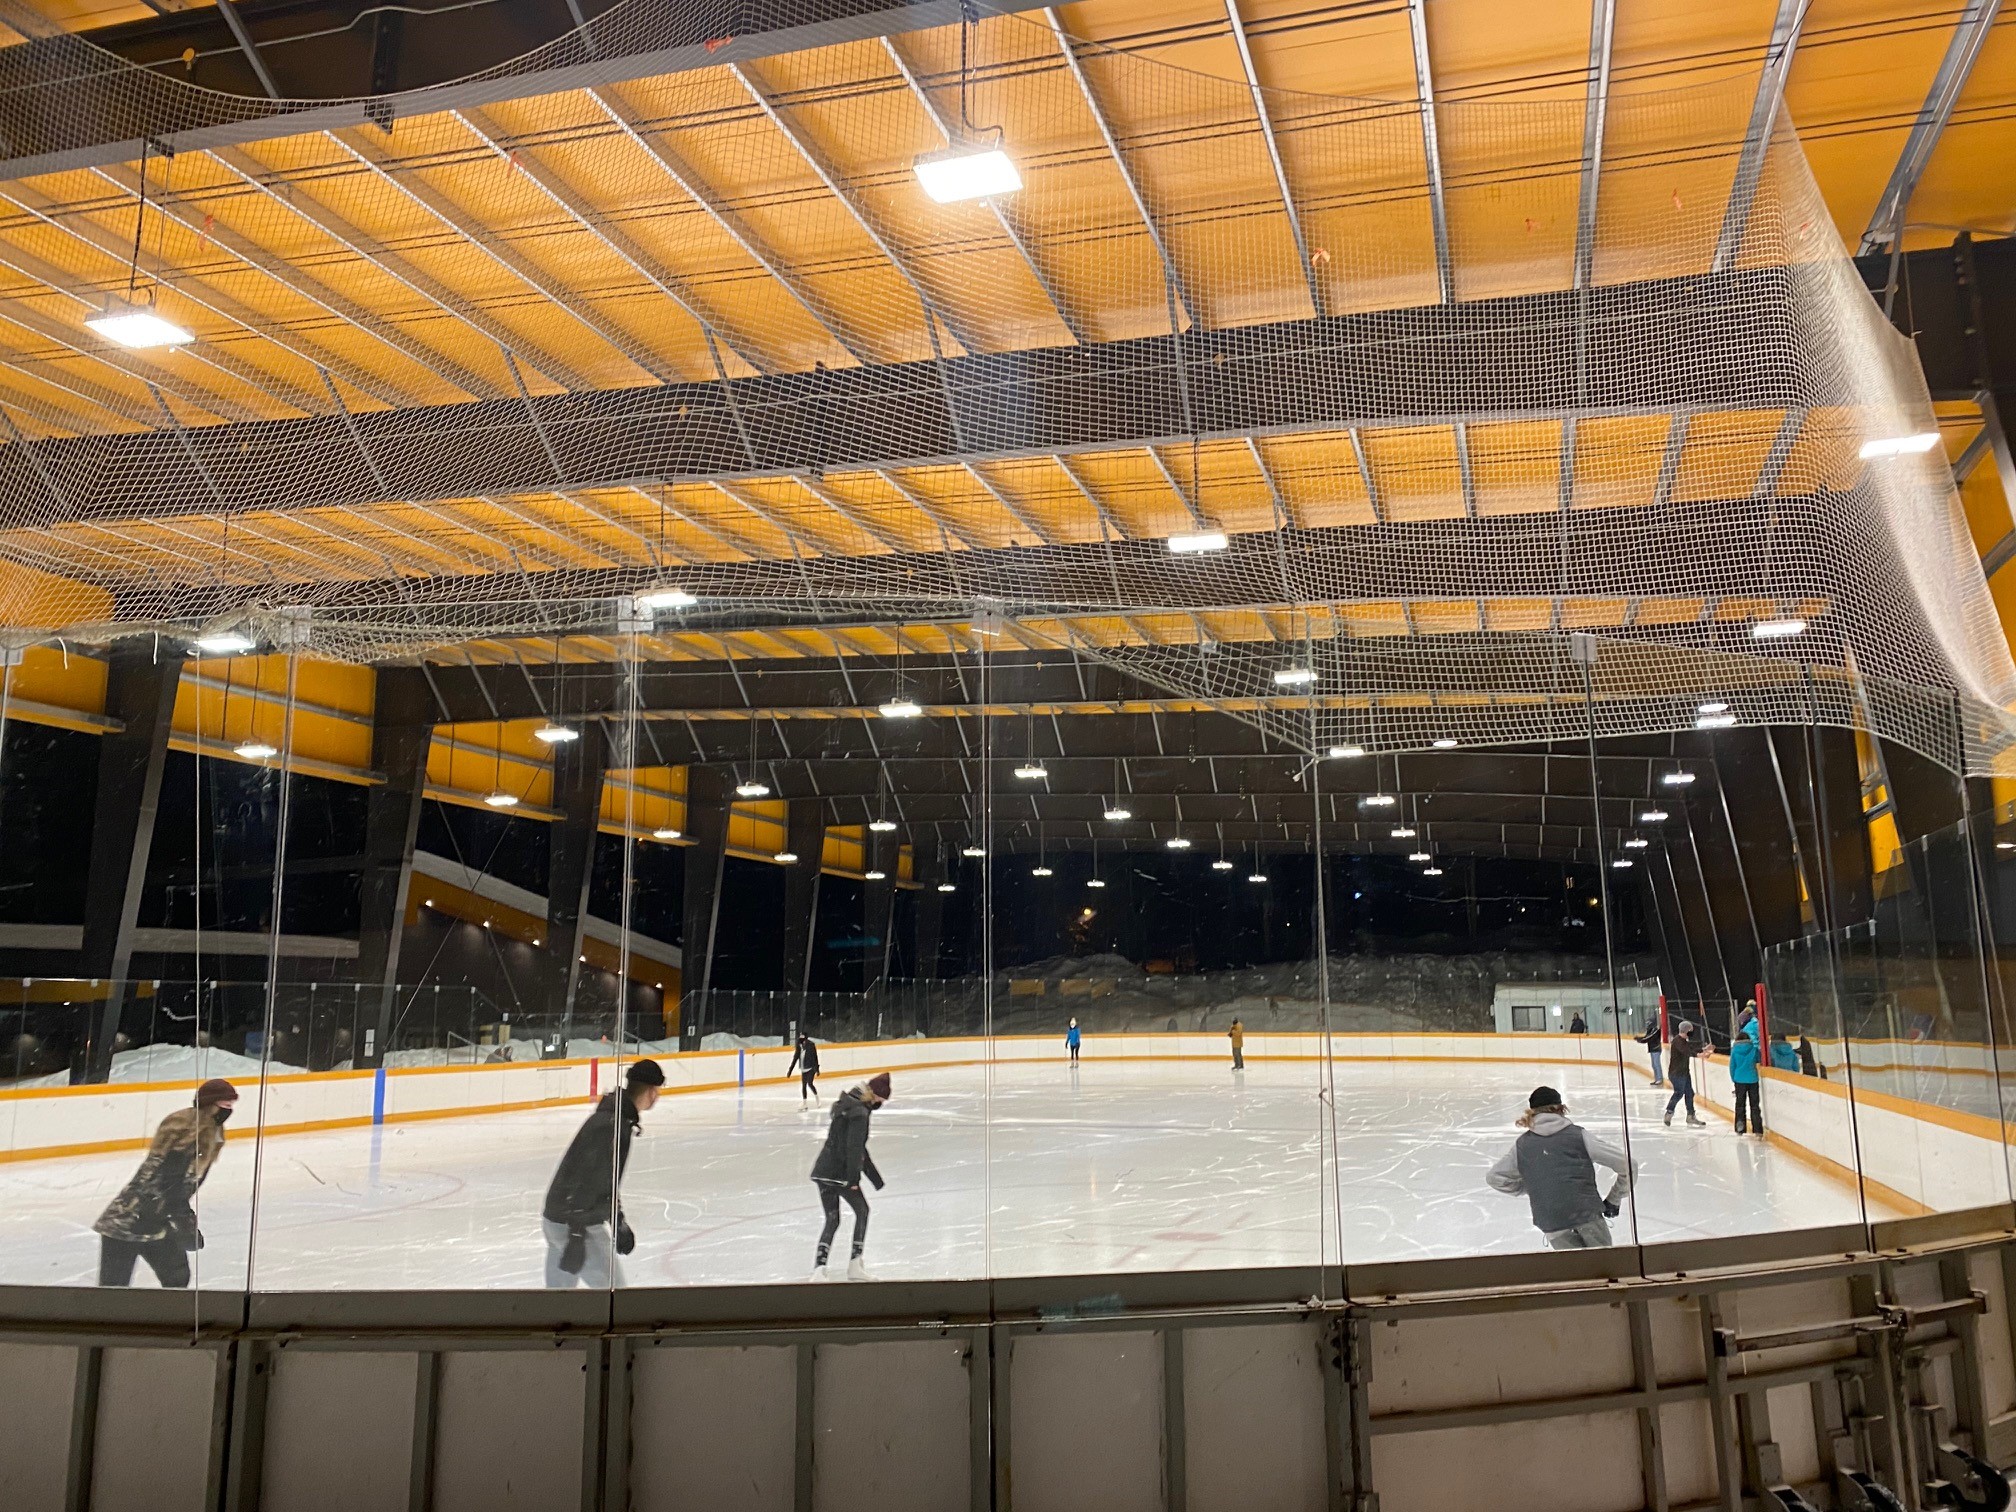 Sun Peaks new NHL Size Covered skating rink